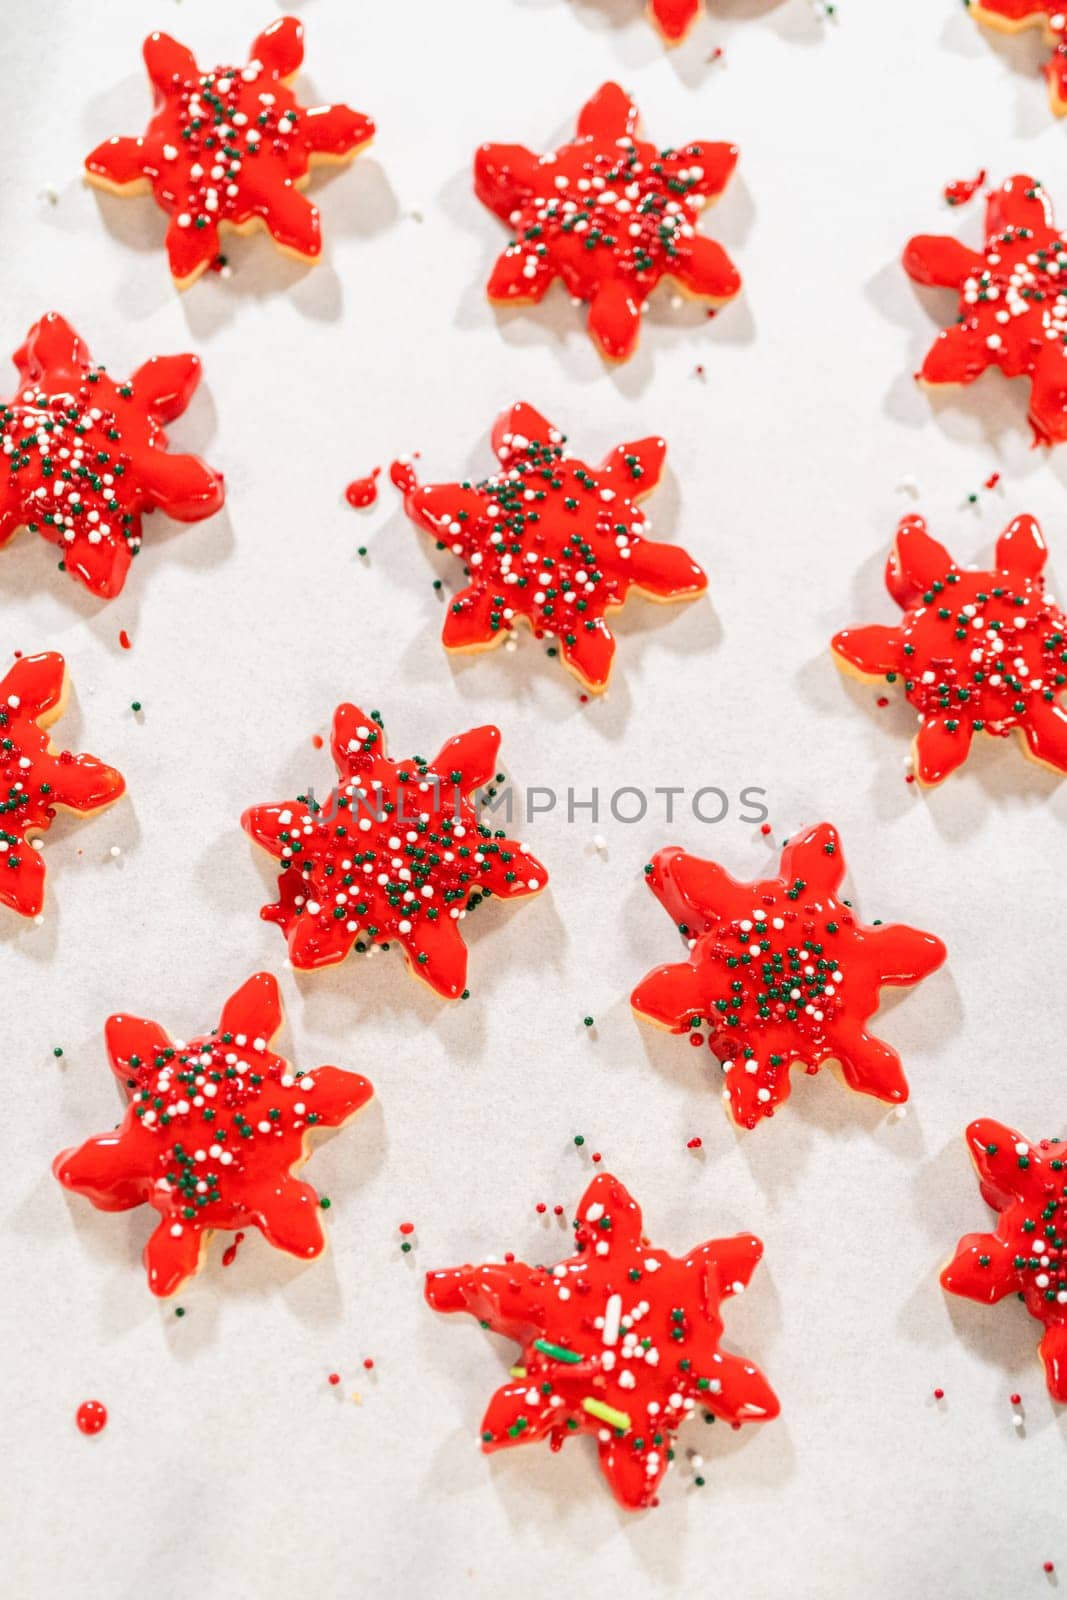 Red Iced Star Cookies with Green Sprinkles, Holiday Baking by arinahabich